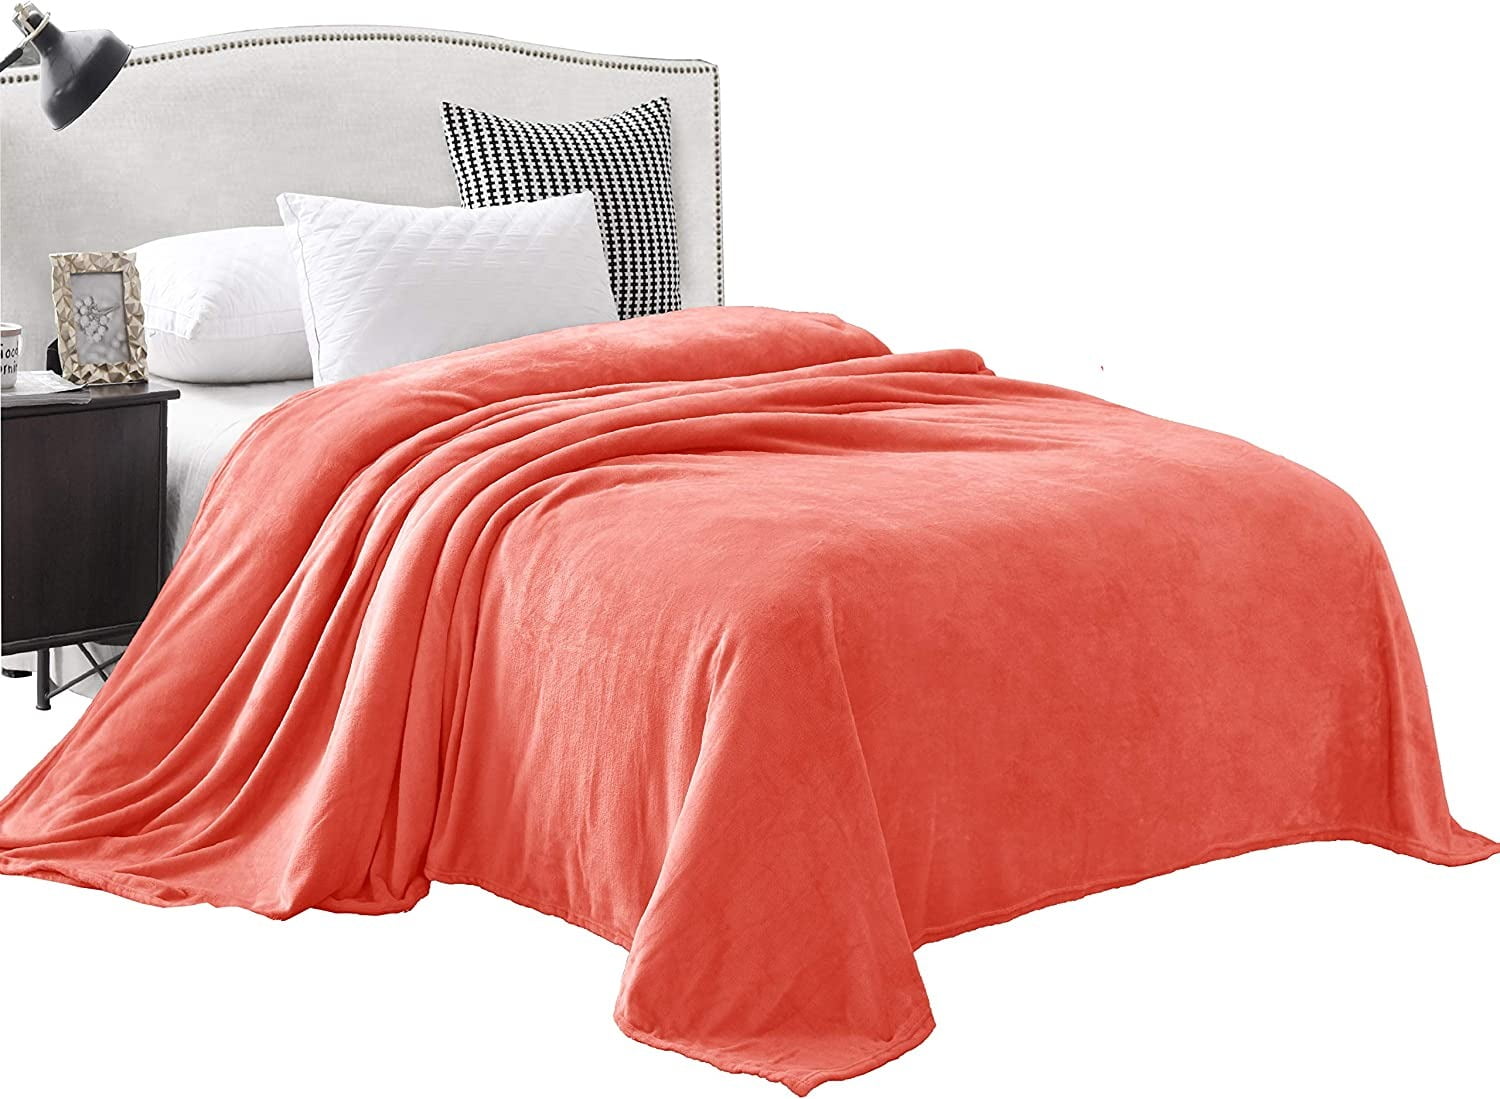 Warm Fitted Sheet Coral Fleece Mattress Cover Twin/Queen Size